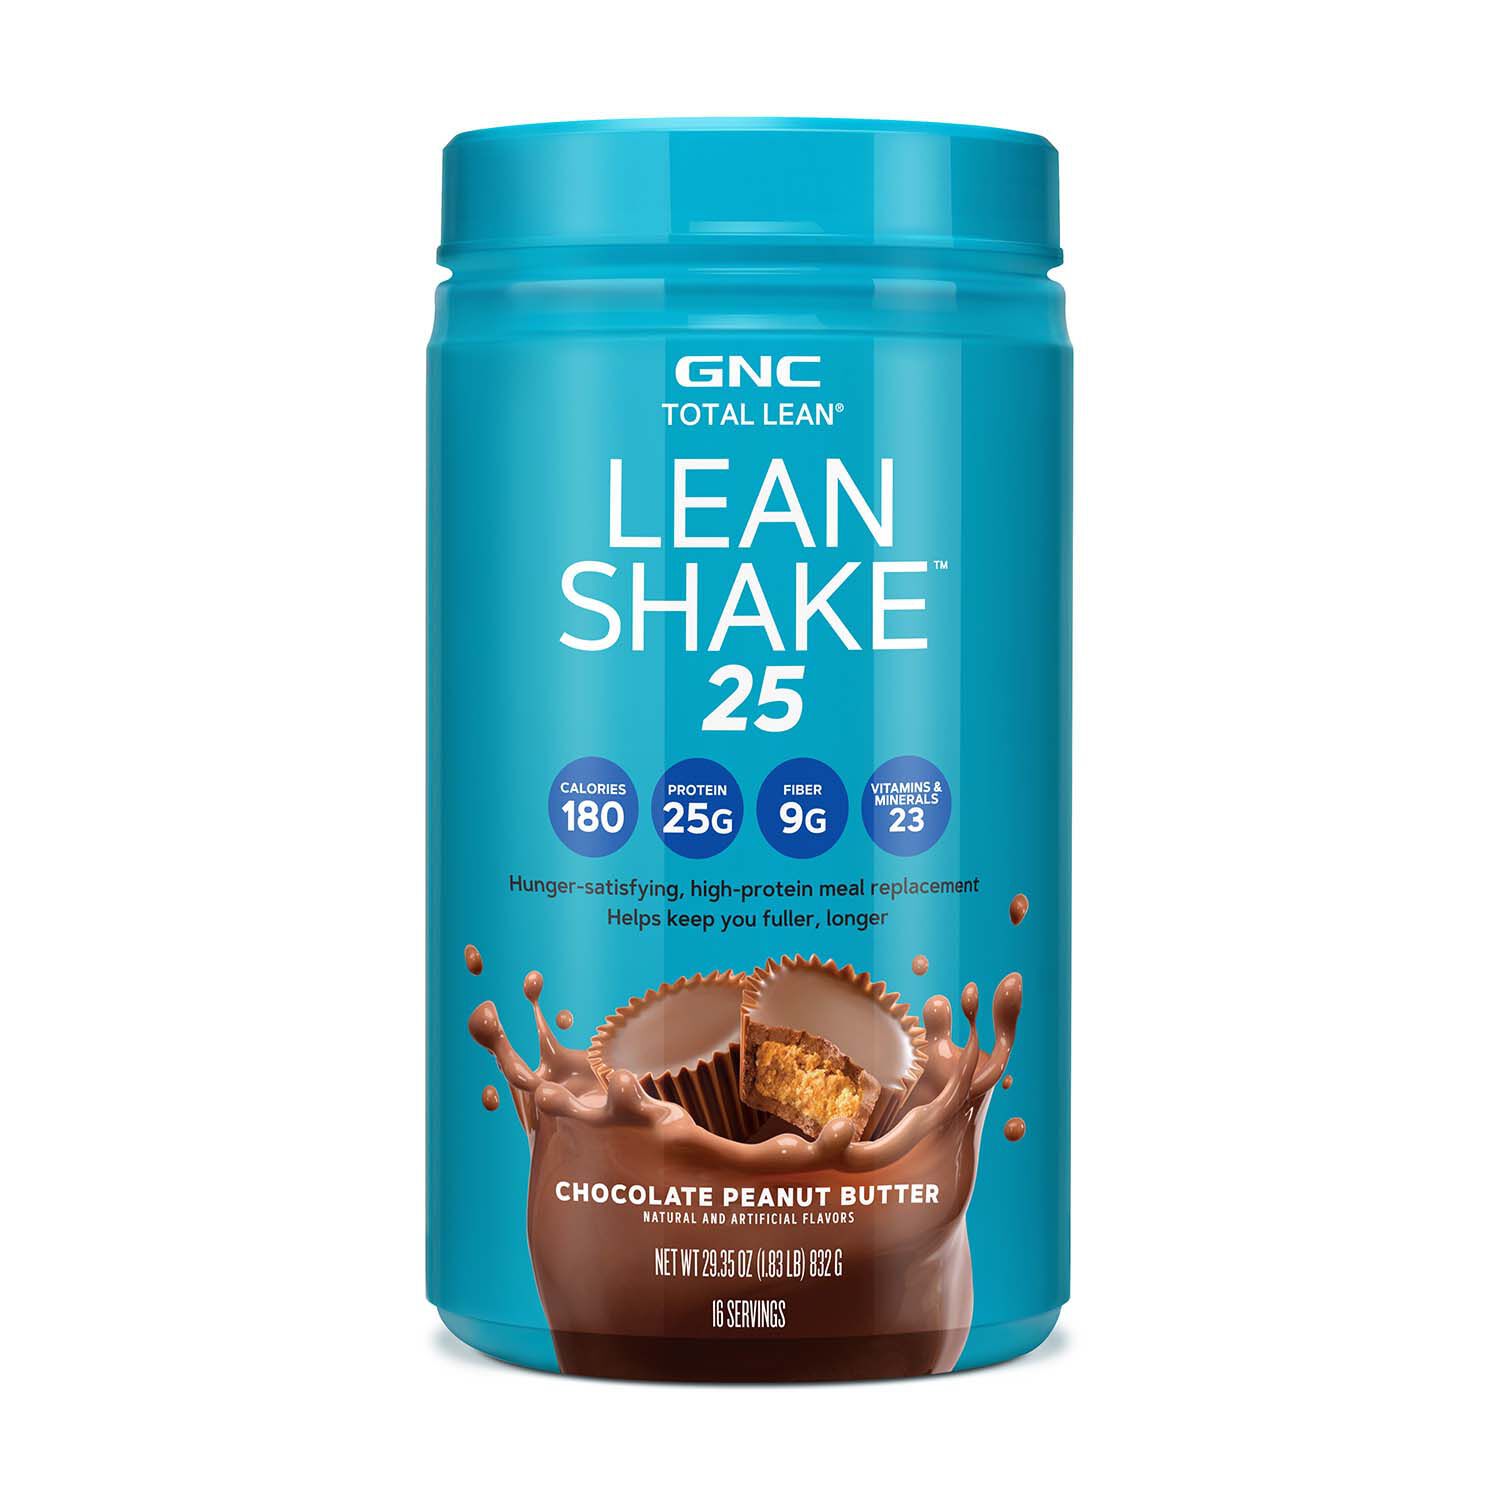 GNC Total Lean Lean Shake 25 pic picture picture